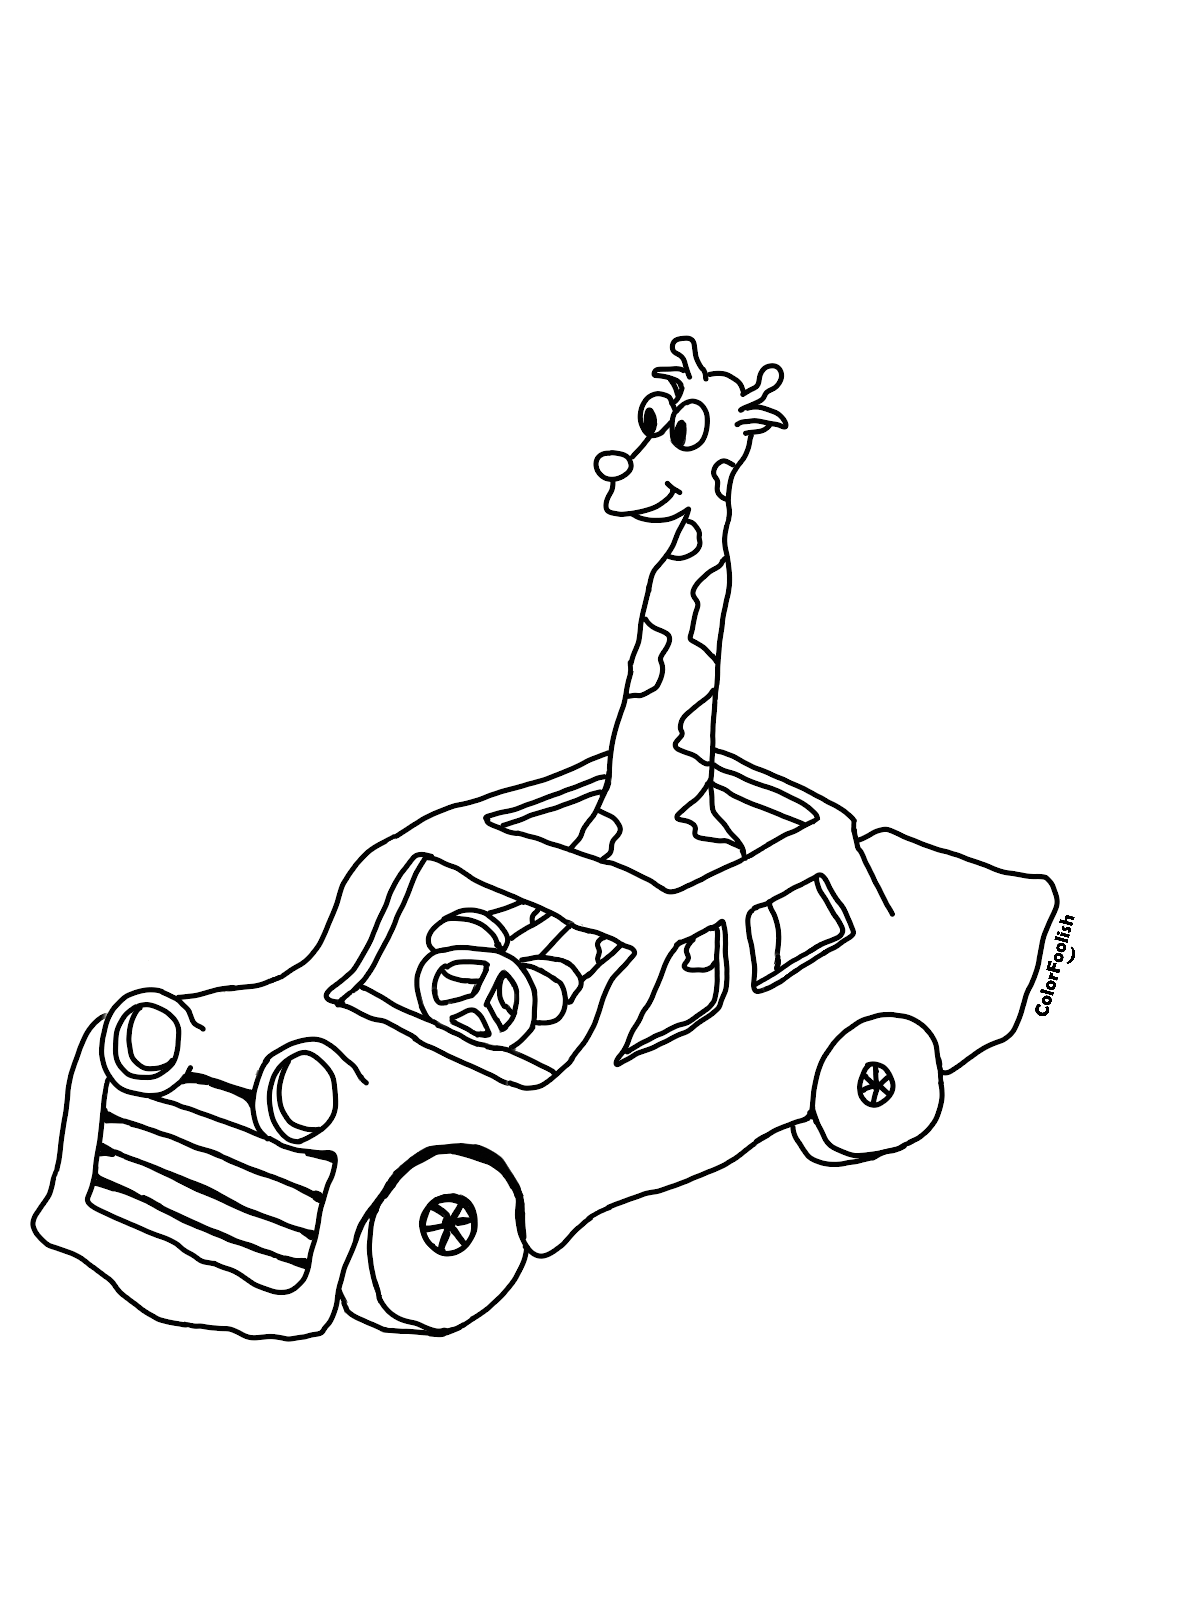 Coloring page of a giraffe in a car